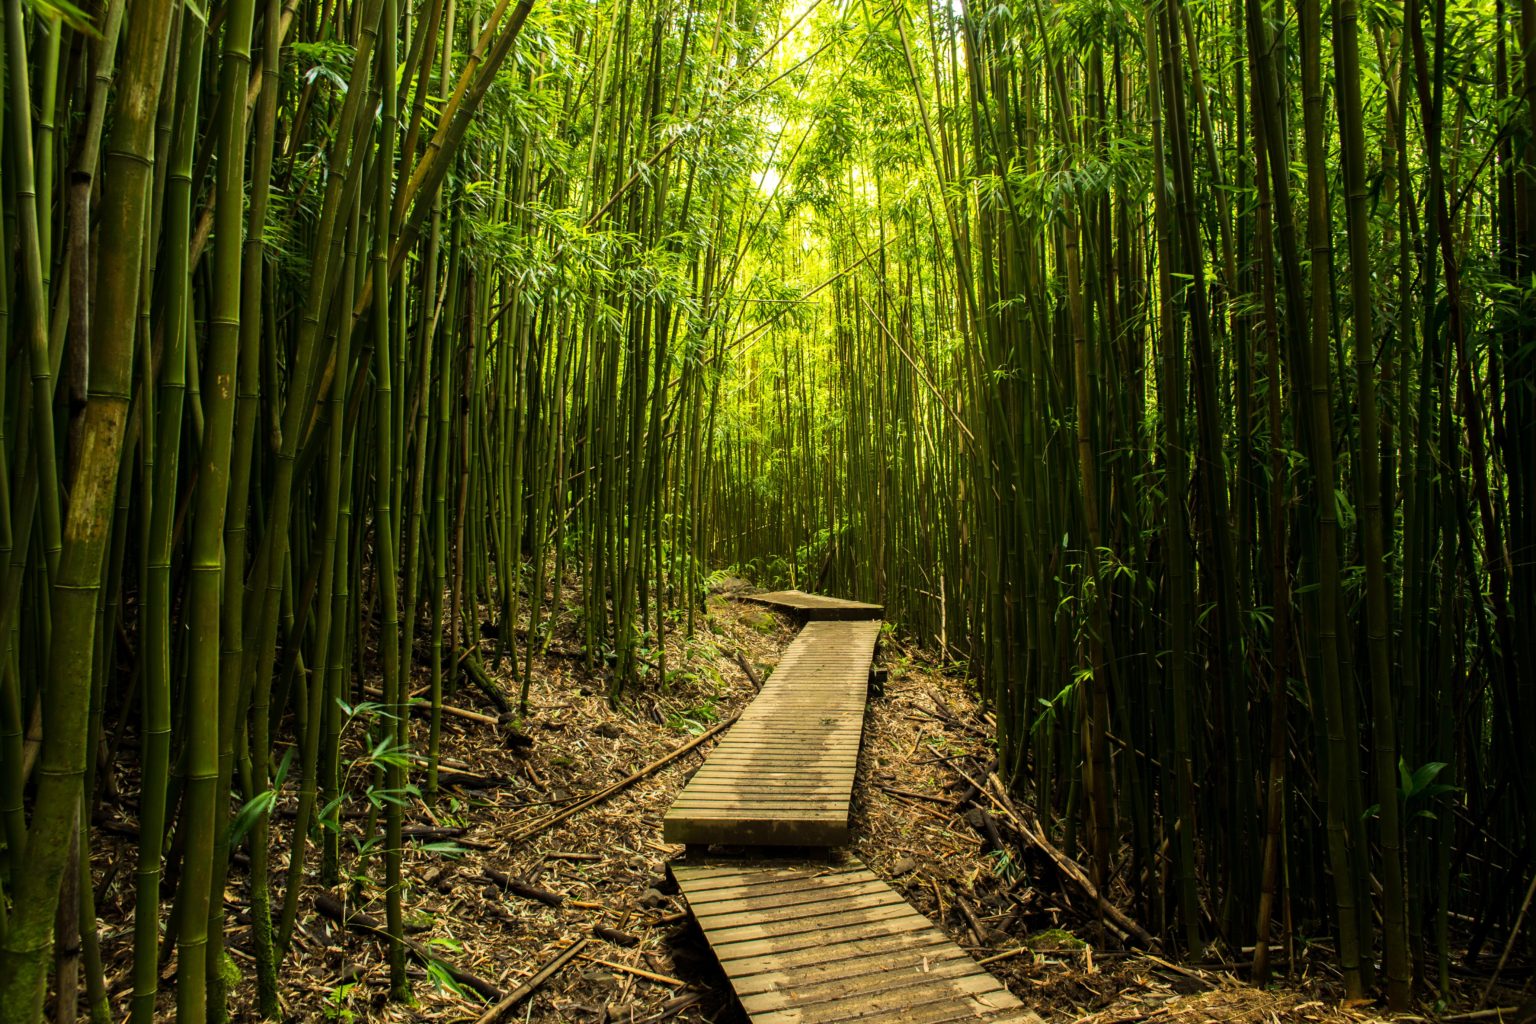 Bamboo Forest, Maui (2021)